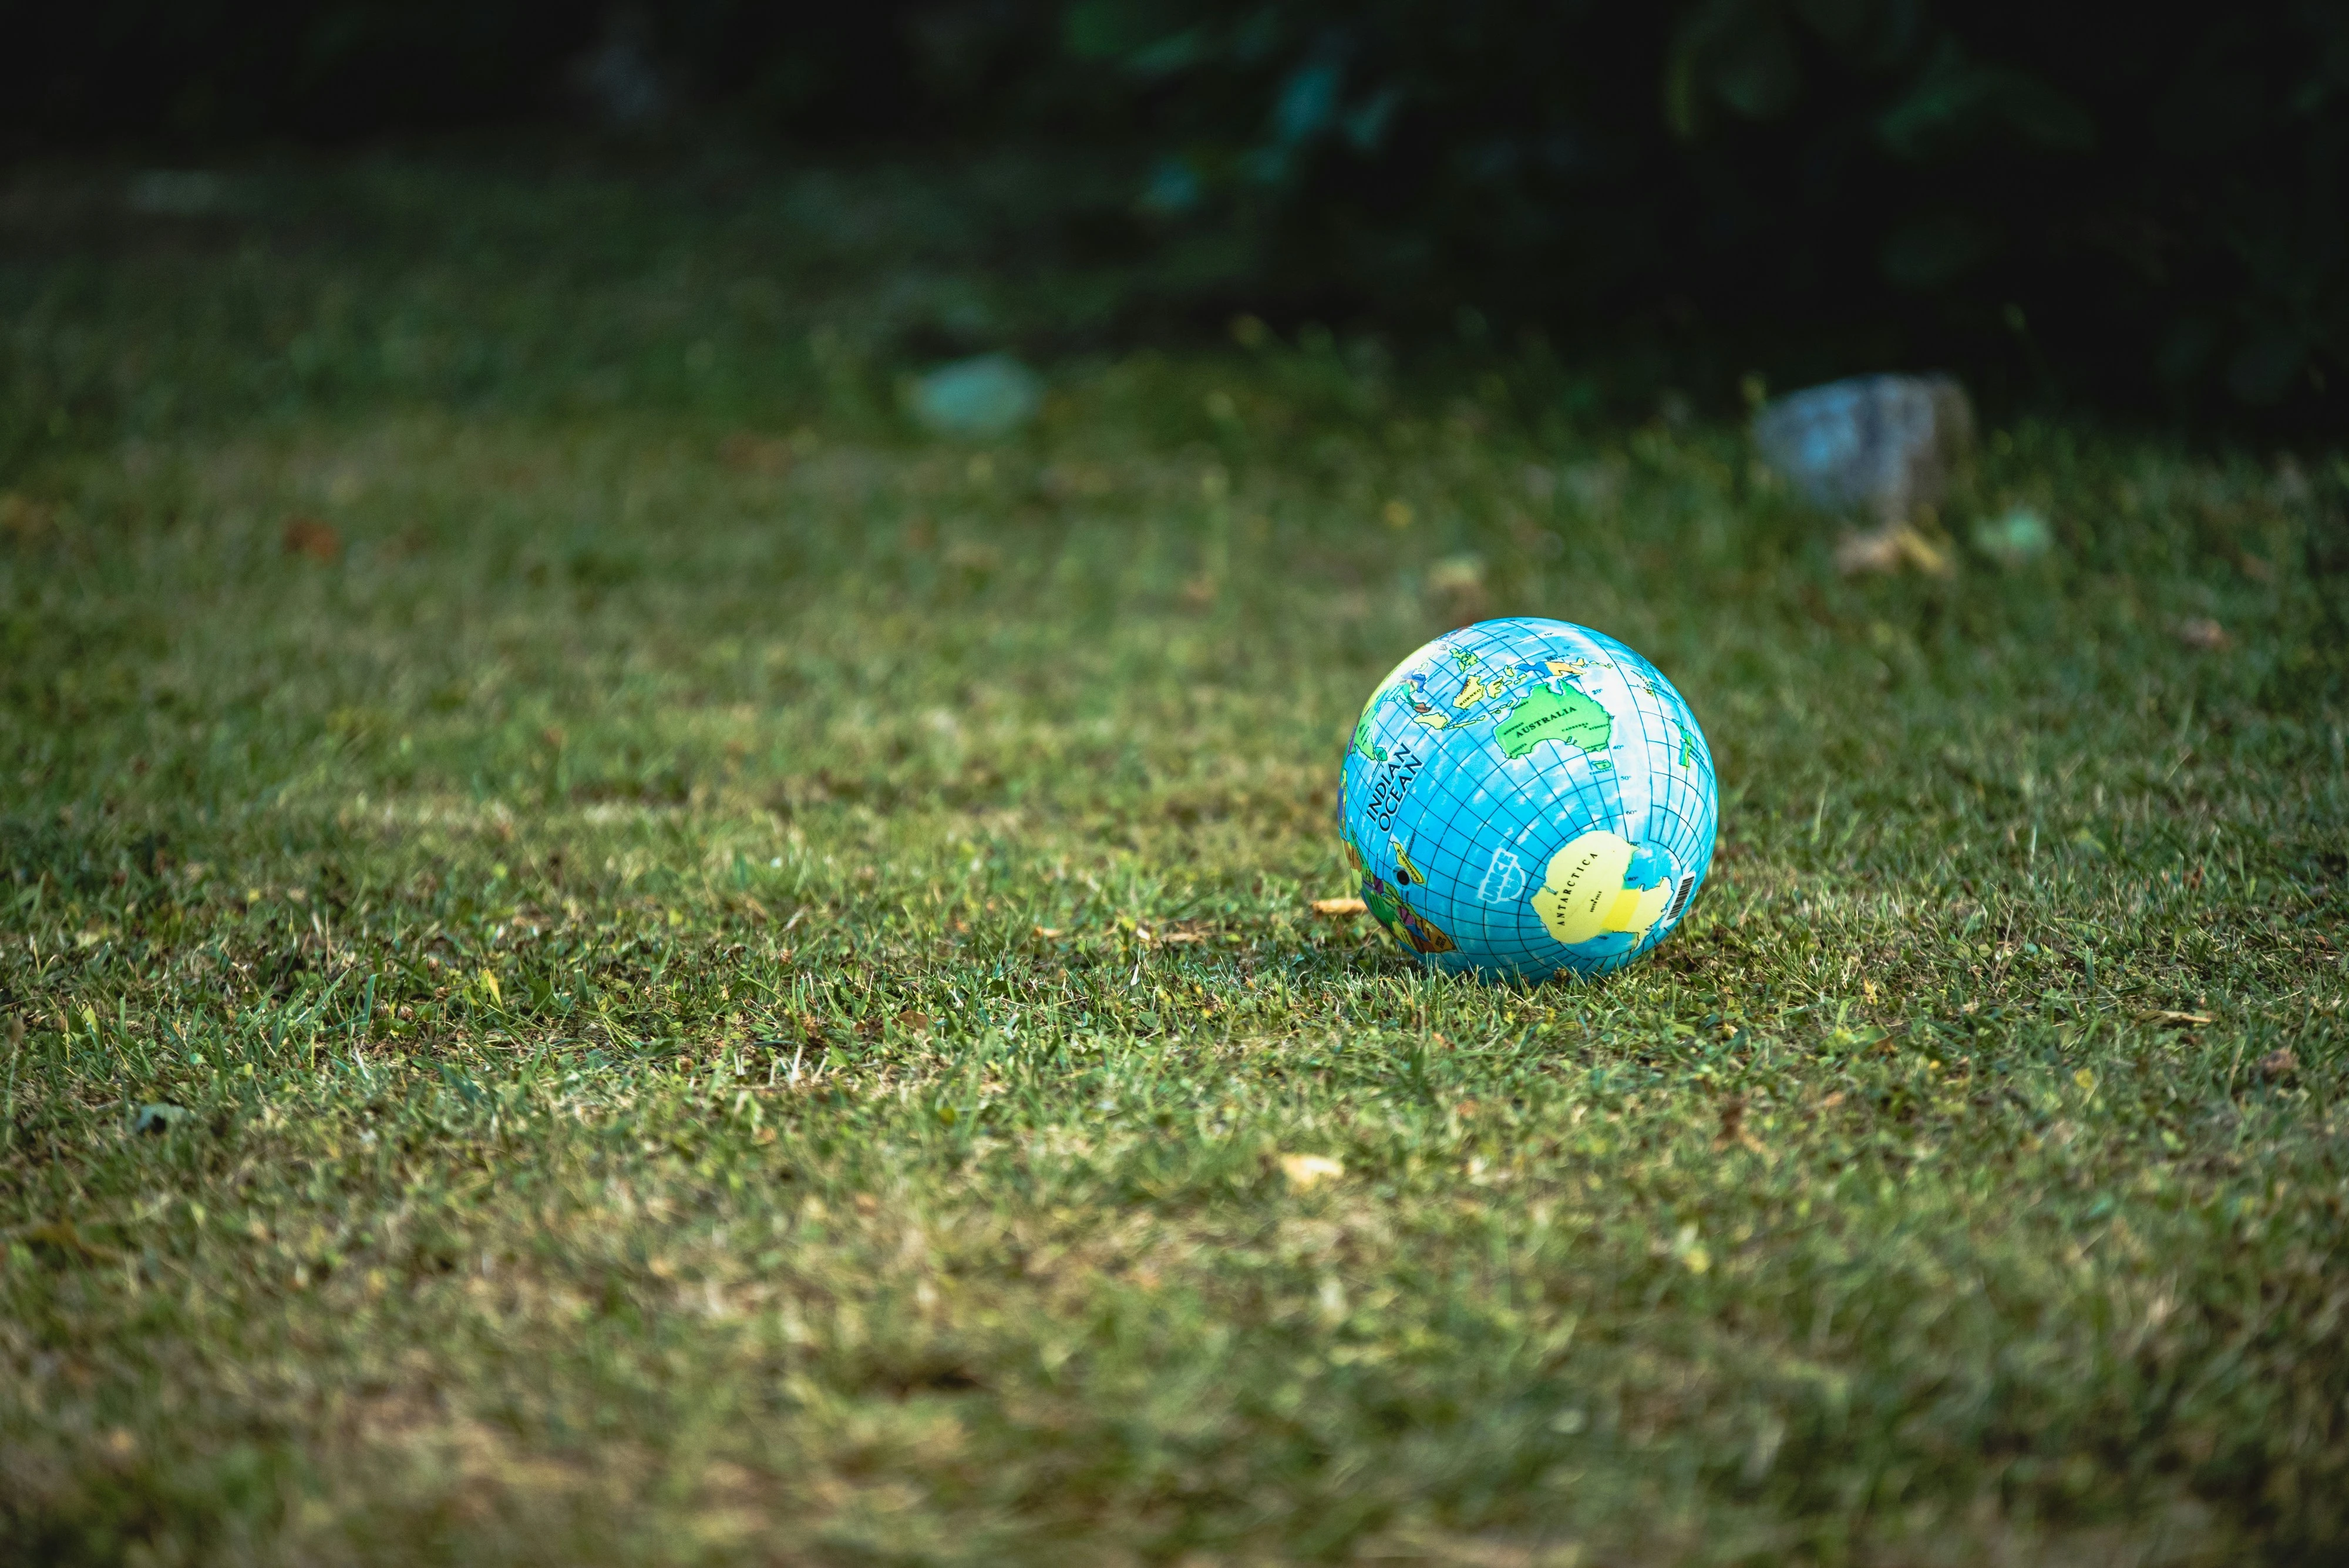 A miniature earth in the grass representing the environmental footprint and impact of man's actions.